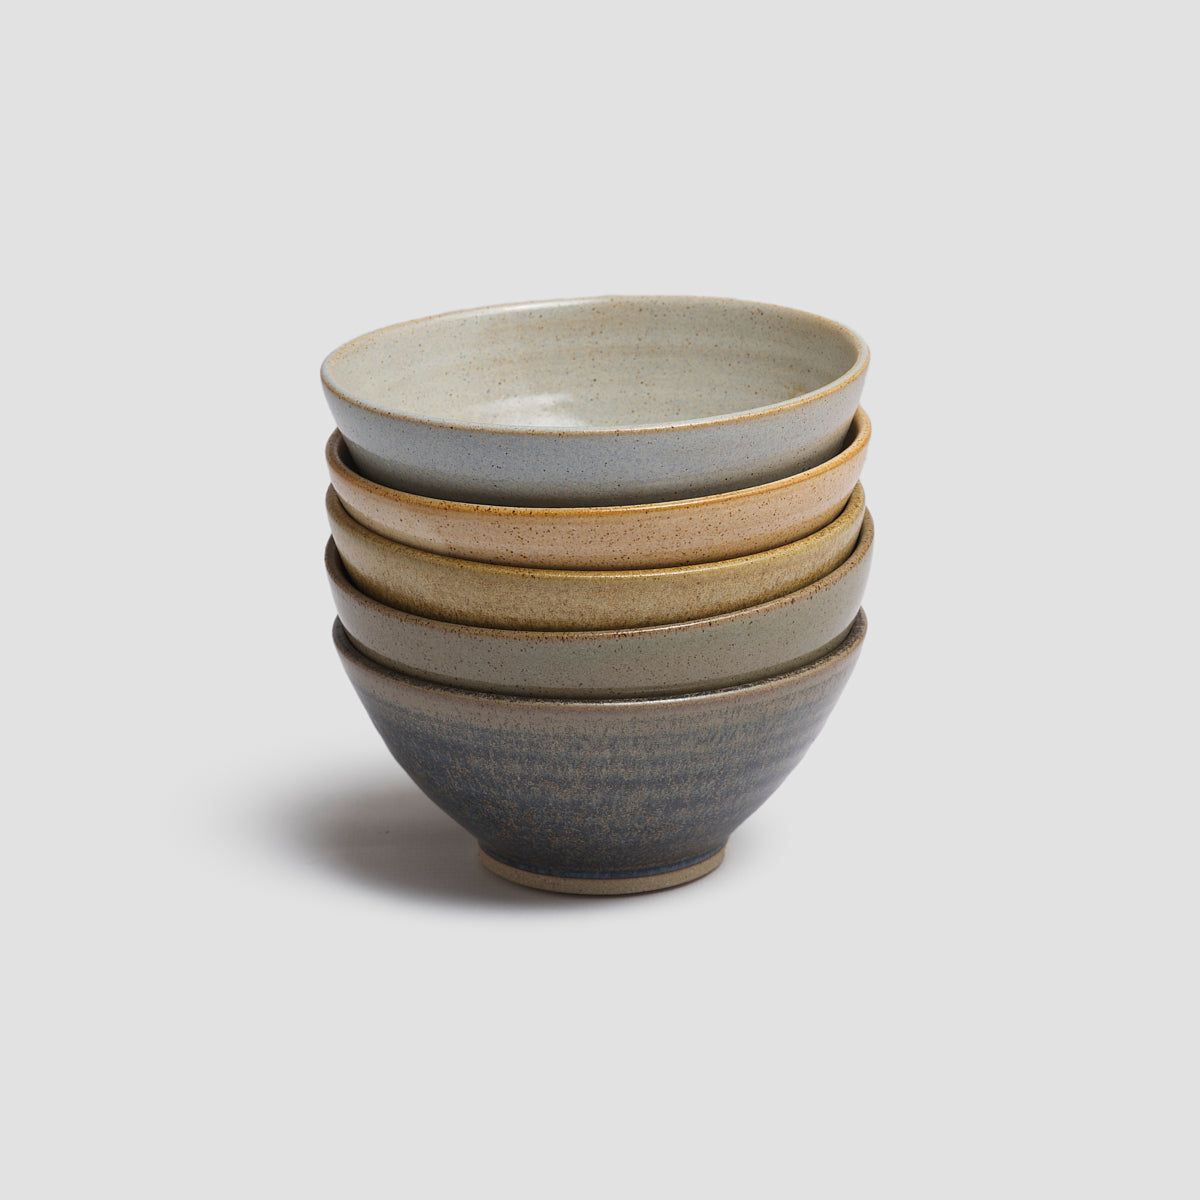 Pottery West Cereal Bowls in Powder, Sand, Ochre, Olive, and Nori